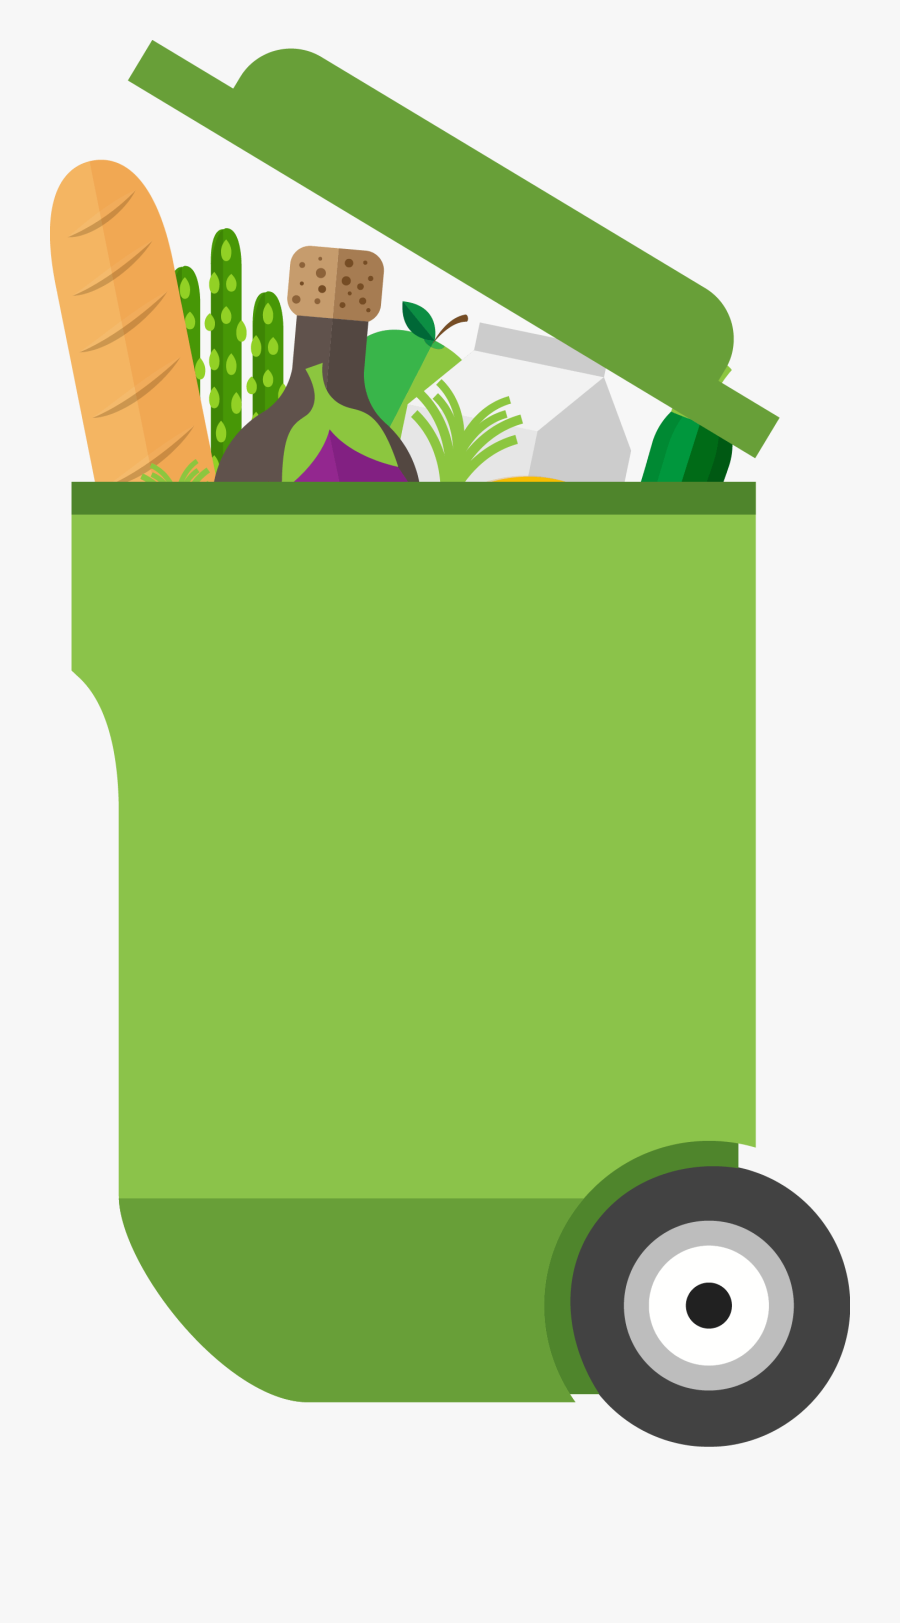 Food And Garbage, Transparent Clipart